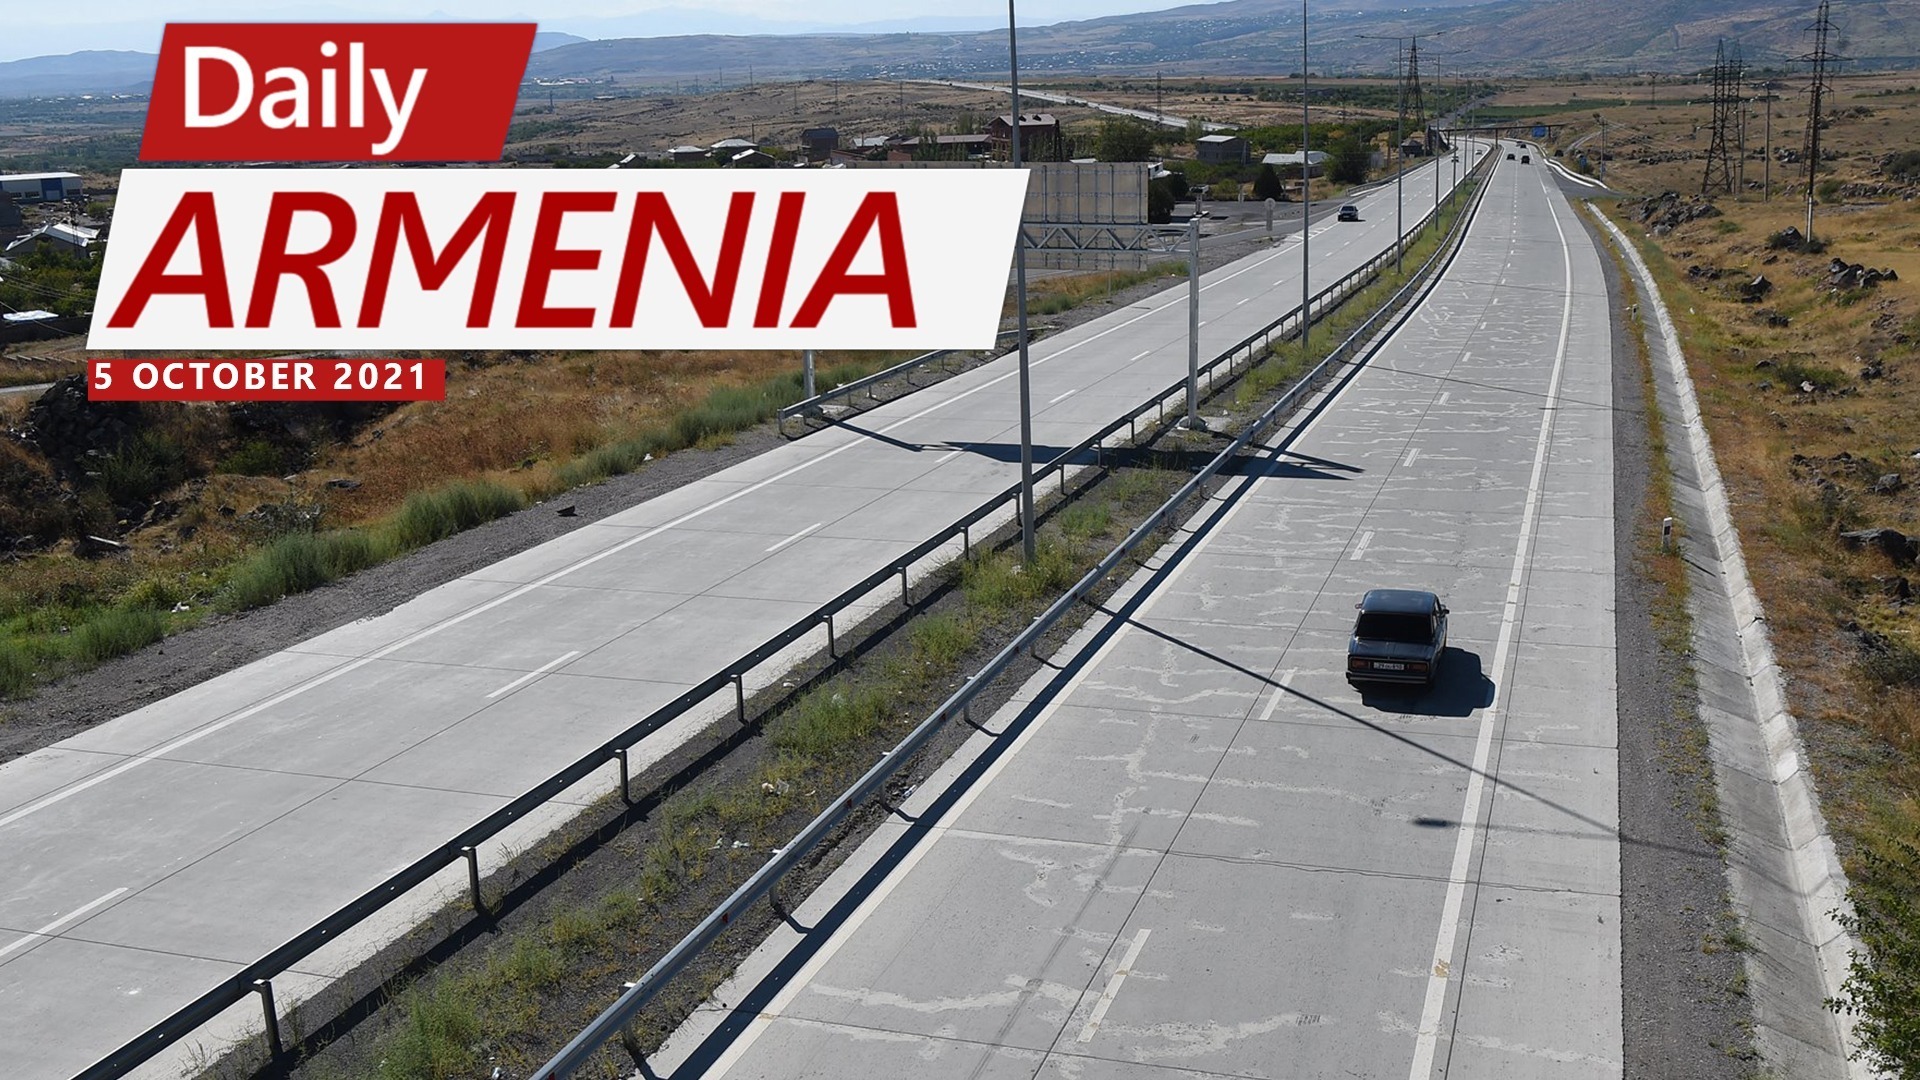 Armenia’s North-South highway will allow Iran to bypass Azerbaijan, says Iranian minister